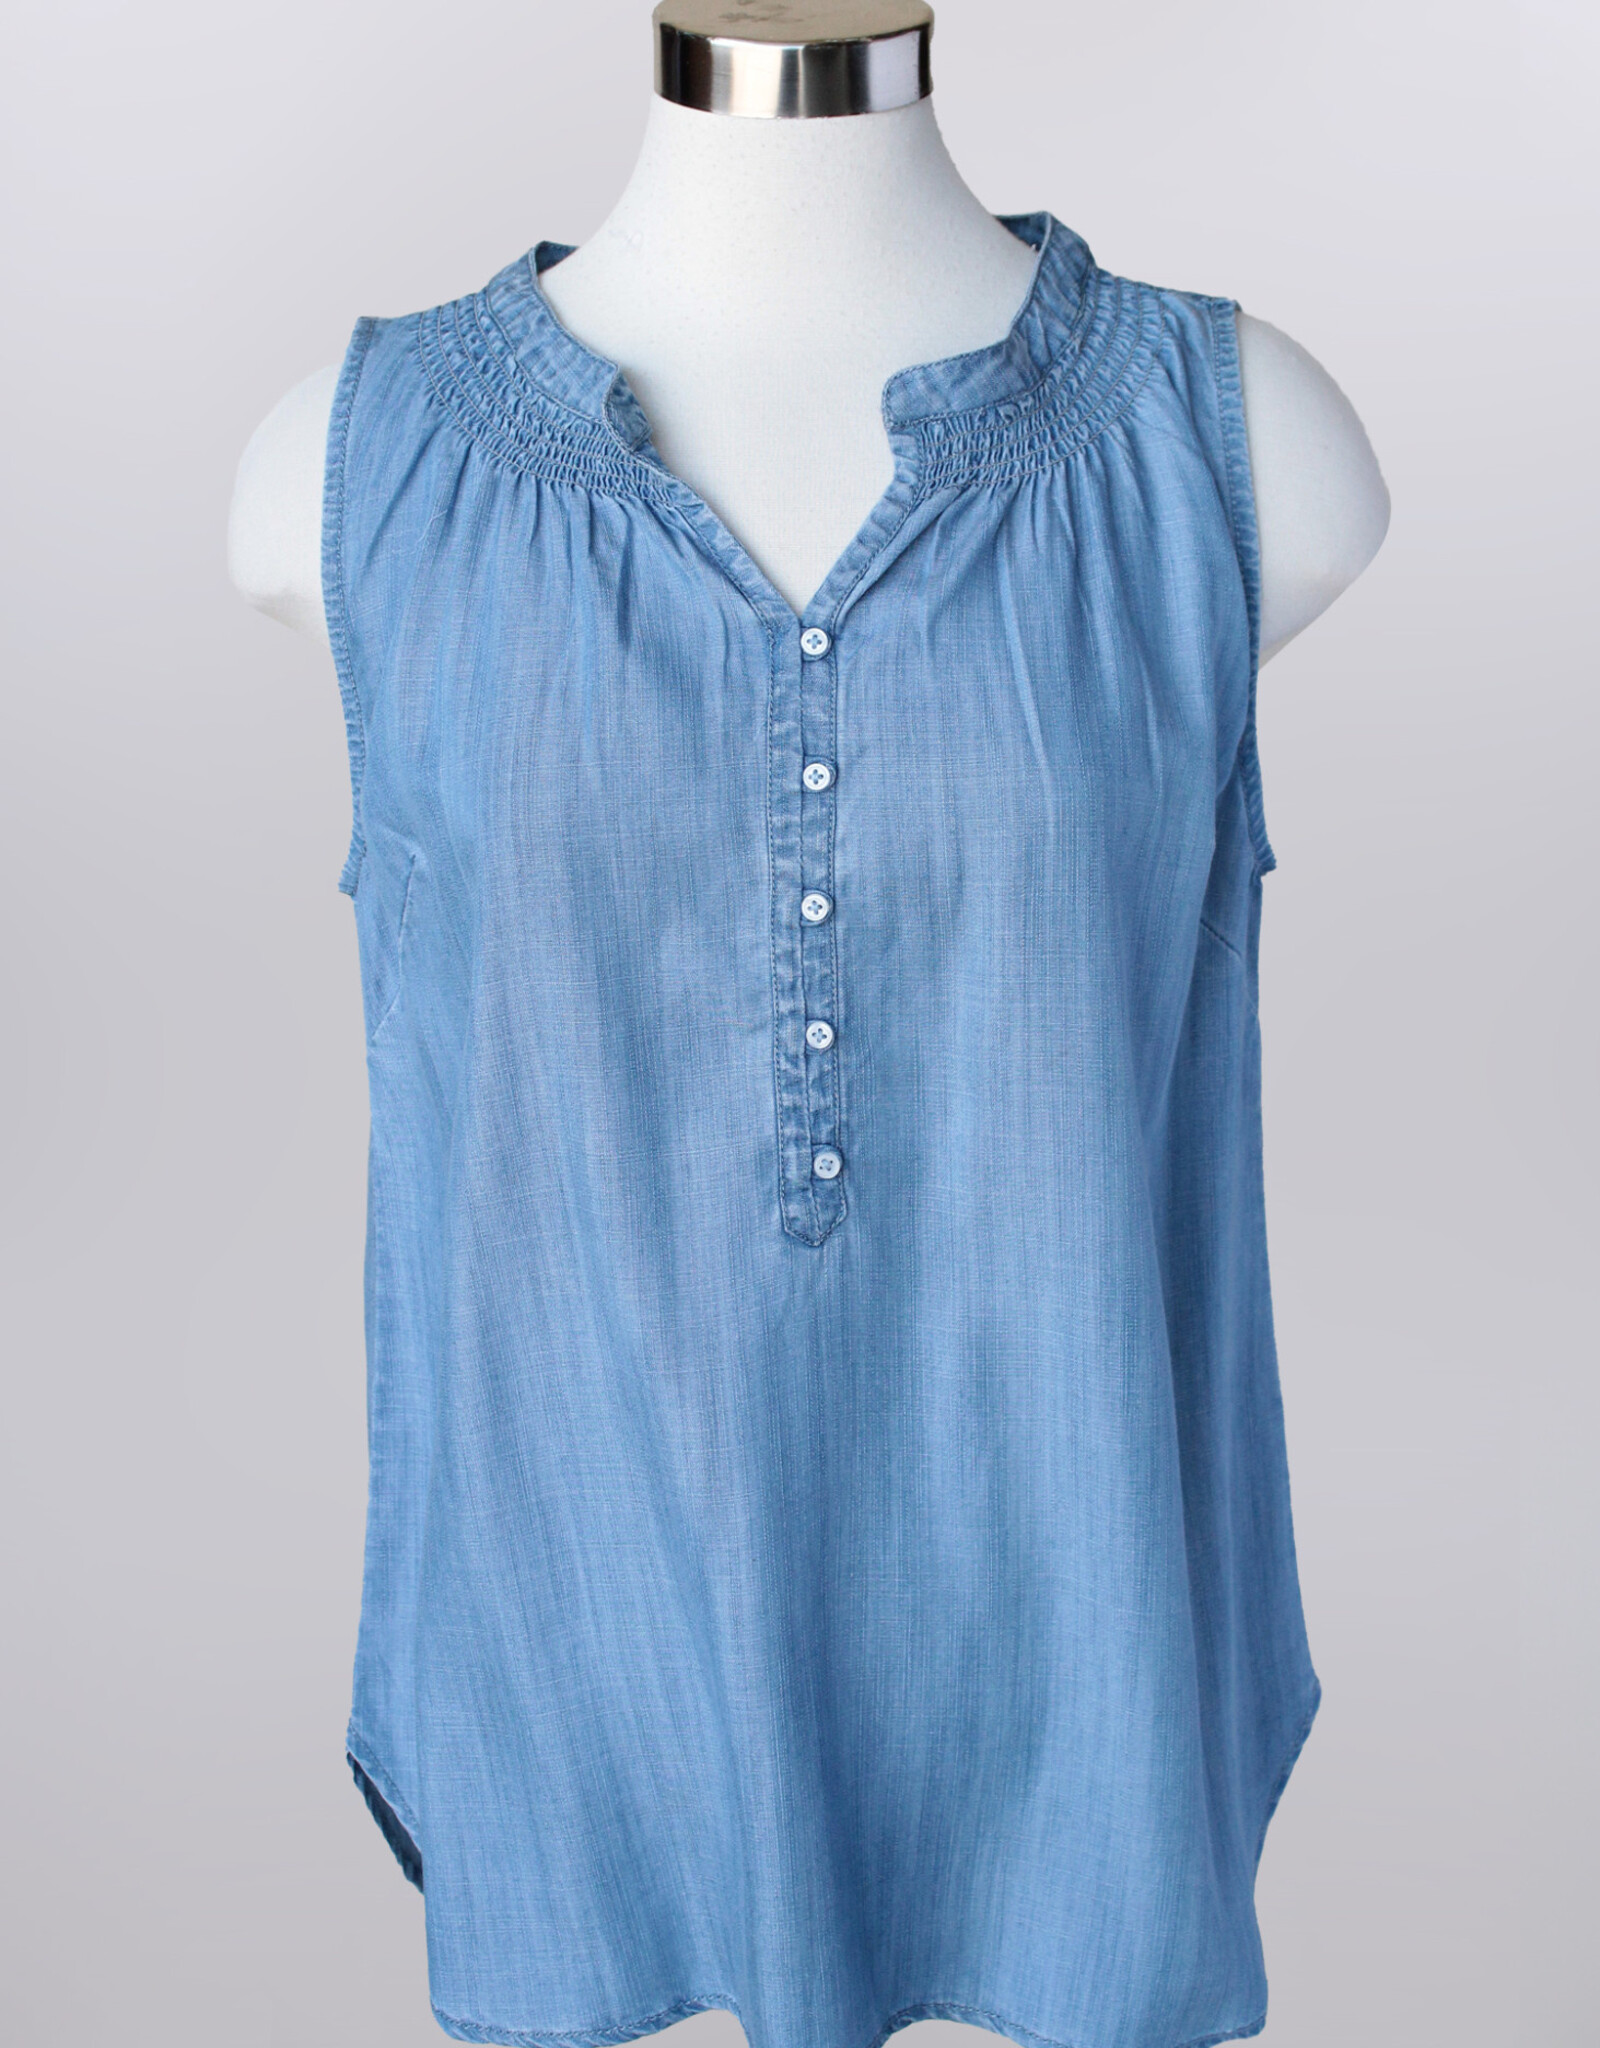 - Blue Rushed 1/2 Button Detail V-Neck Sleeveless Top